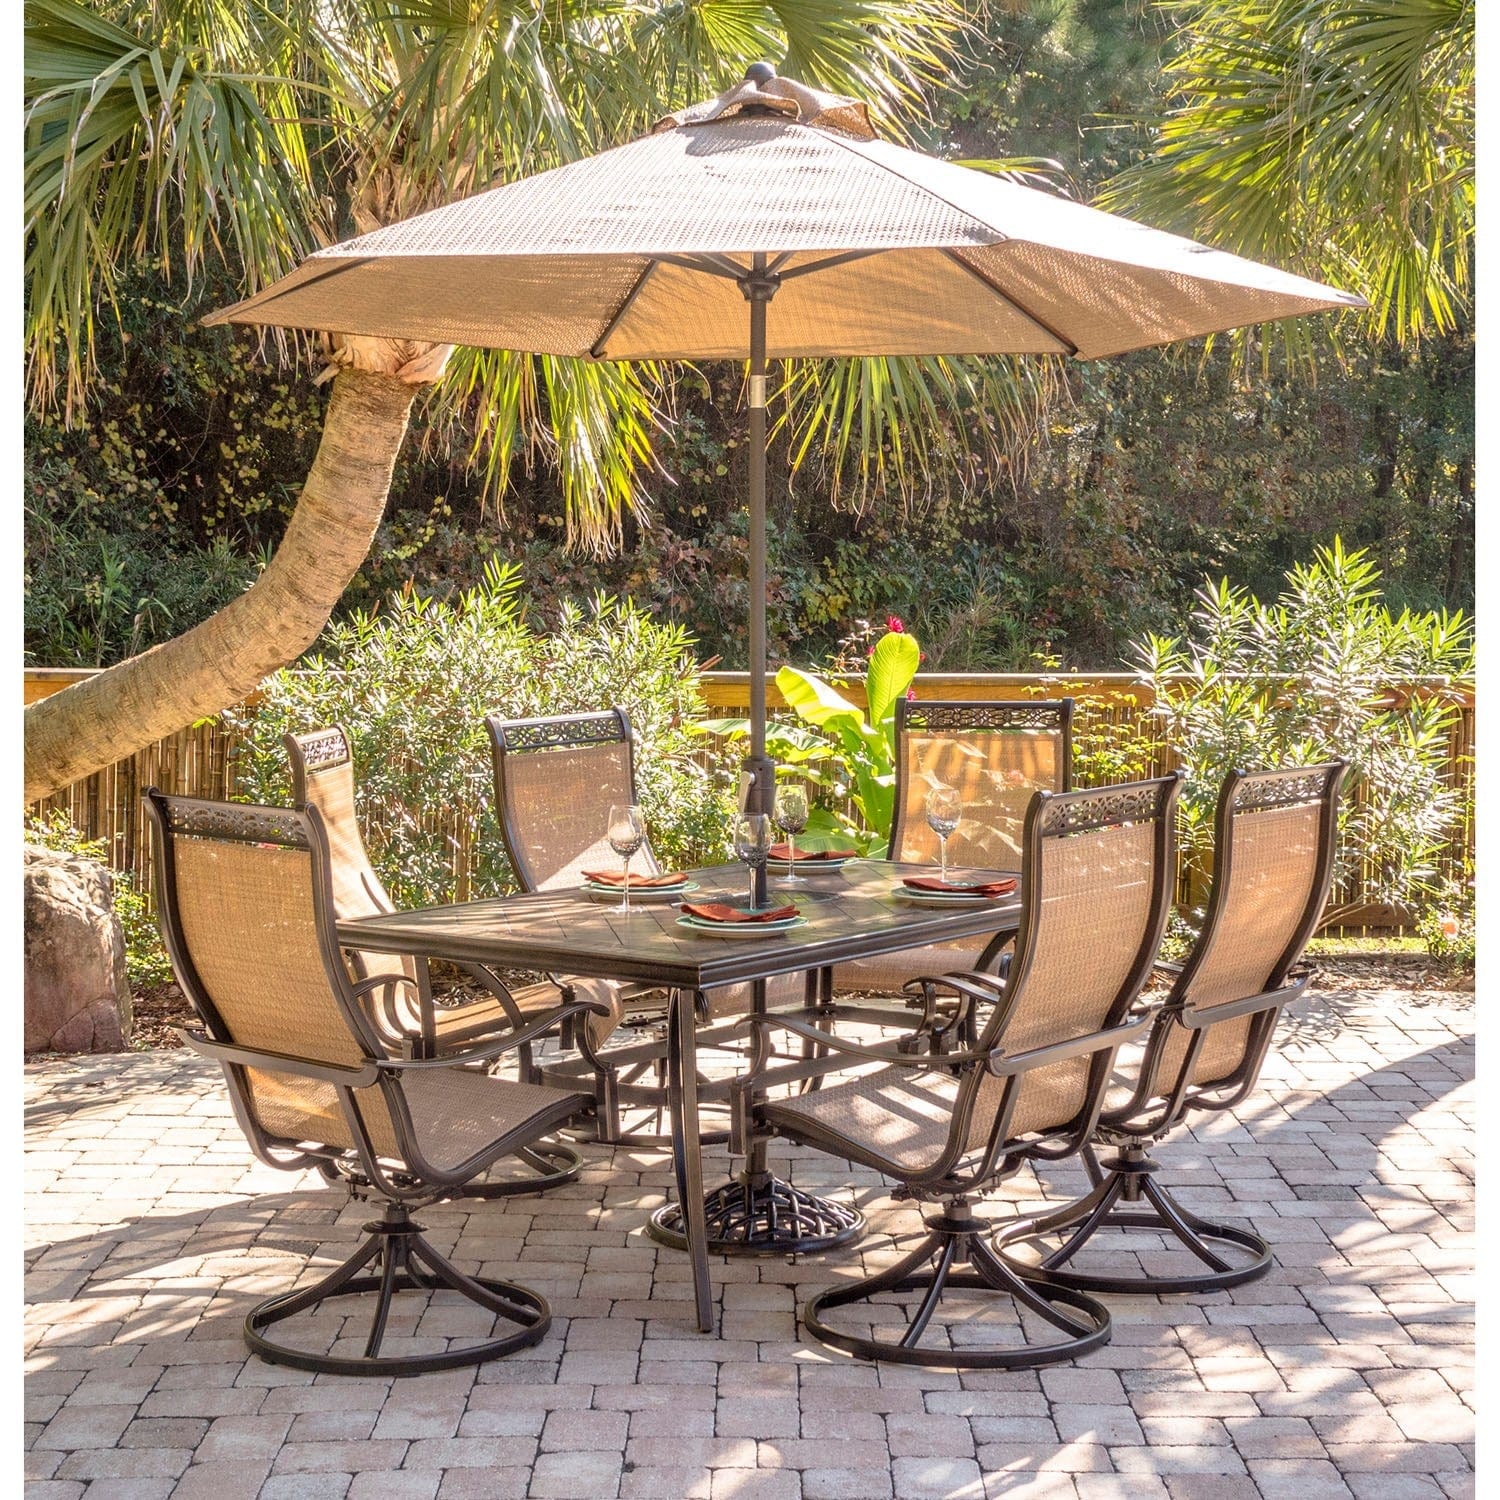 Hanover Outdoor Dining Set Hanover Monaco 7-Piece Dining Set with Six Swivel Rockers, a 68 x 40 in. Dining Table, 9 Ft. Table Umbrella, and Umbrella Stand | MONDN7PCSW6-SU